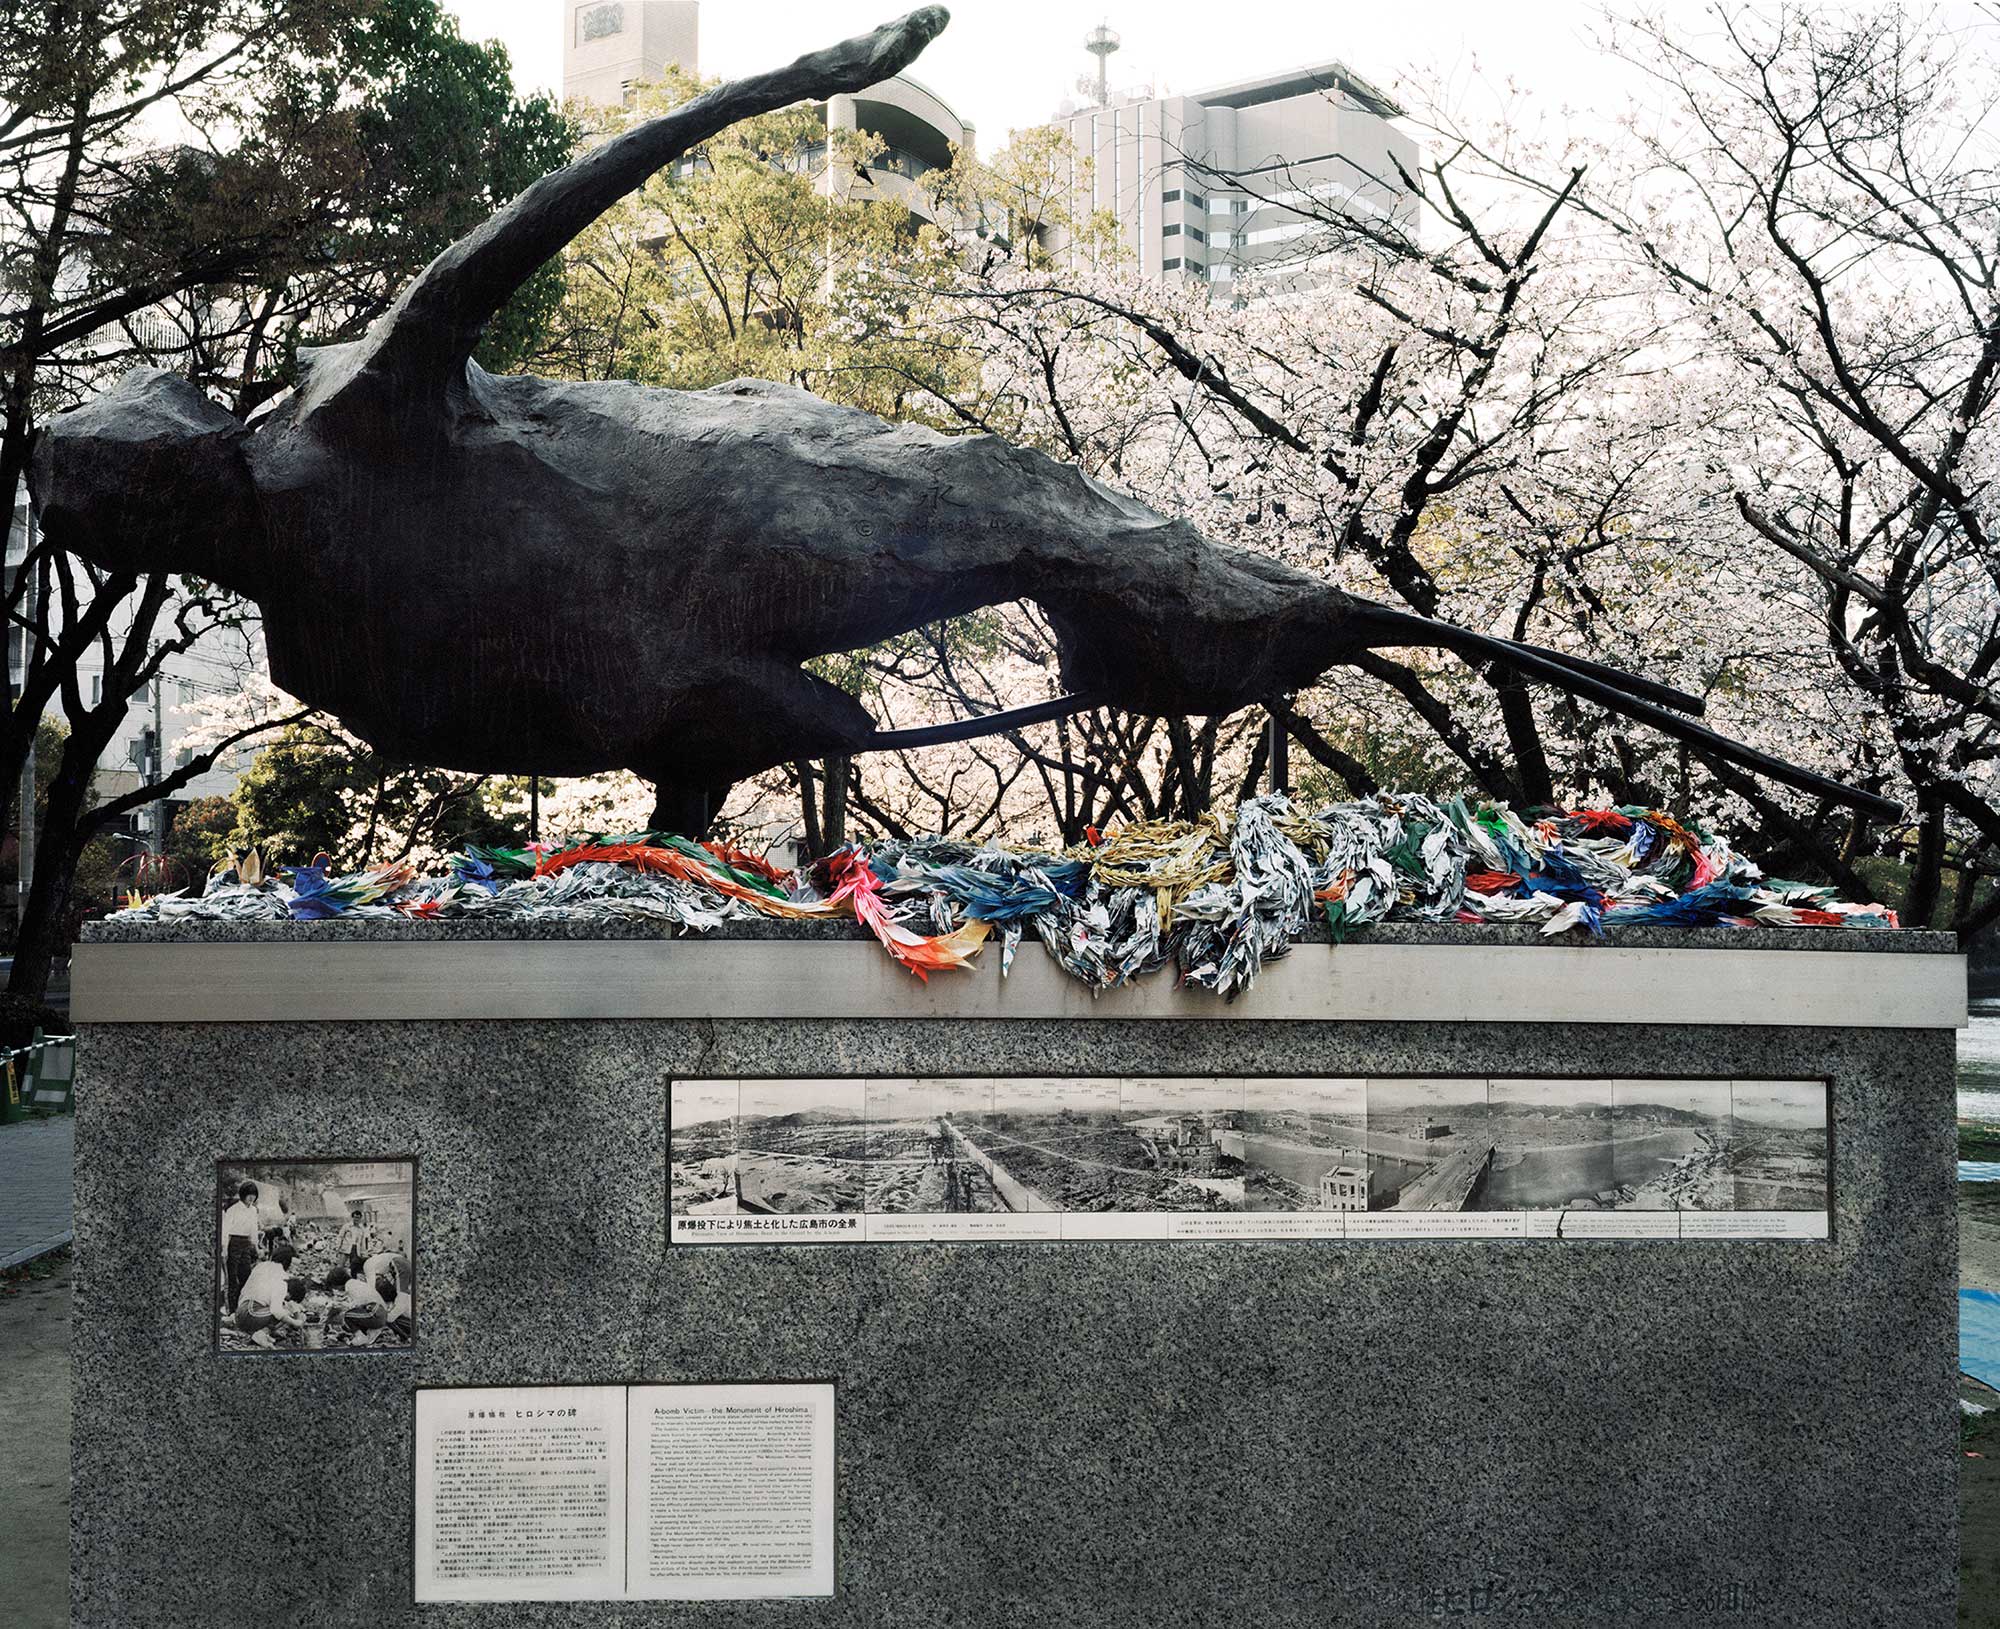 A-bomb Victim--Monument of Hiroshima, 141 meters from the hypocenter, photograph by Shigeo Hyashi, October 5, 1945, 2013, Chromogenic print, 30 x 40 inch.